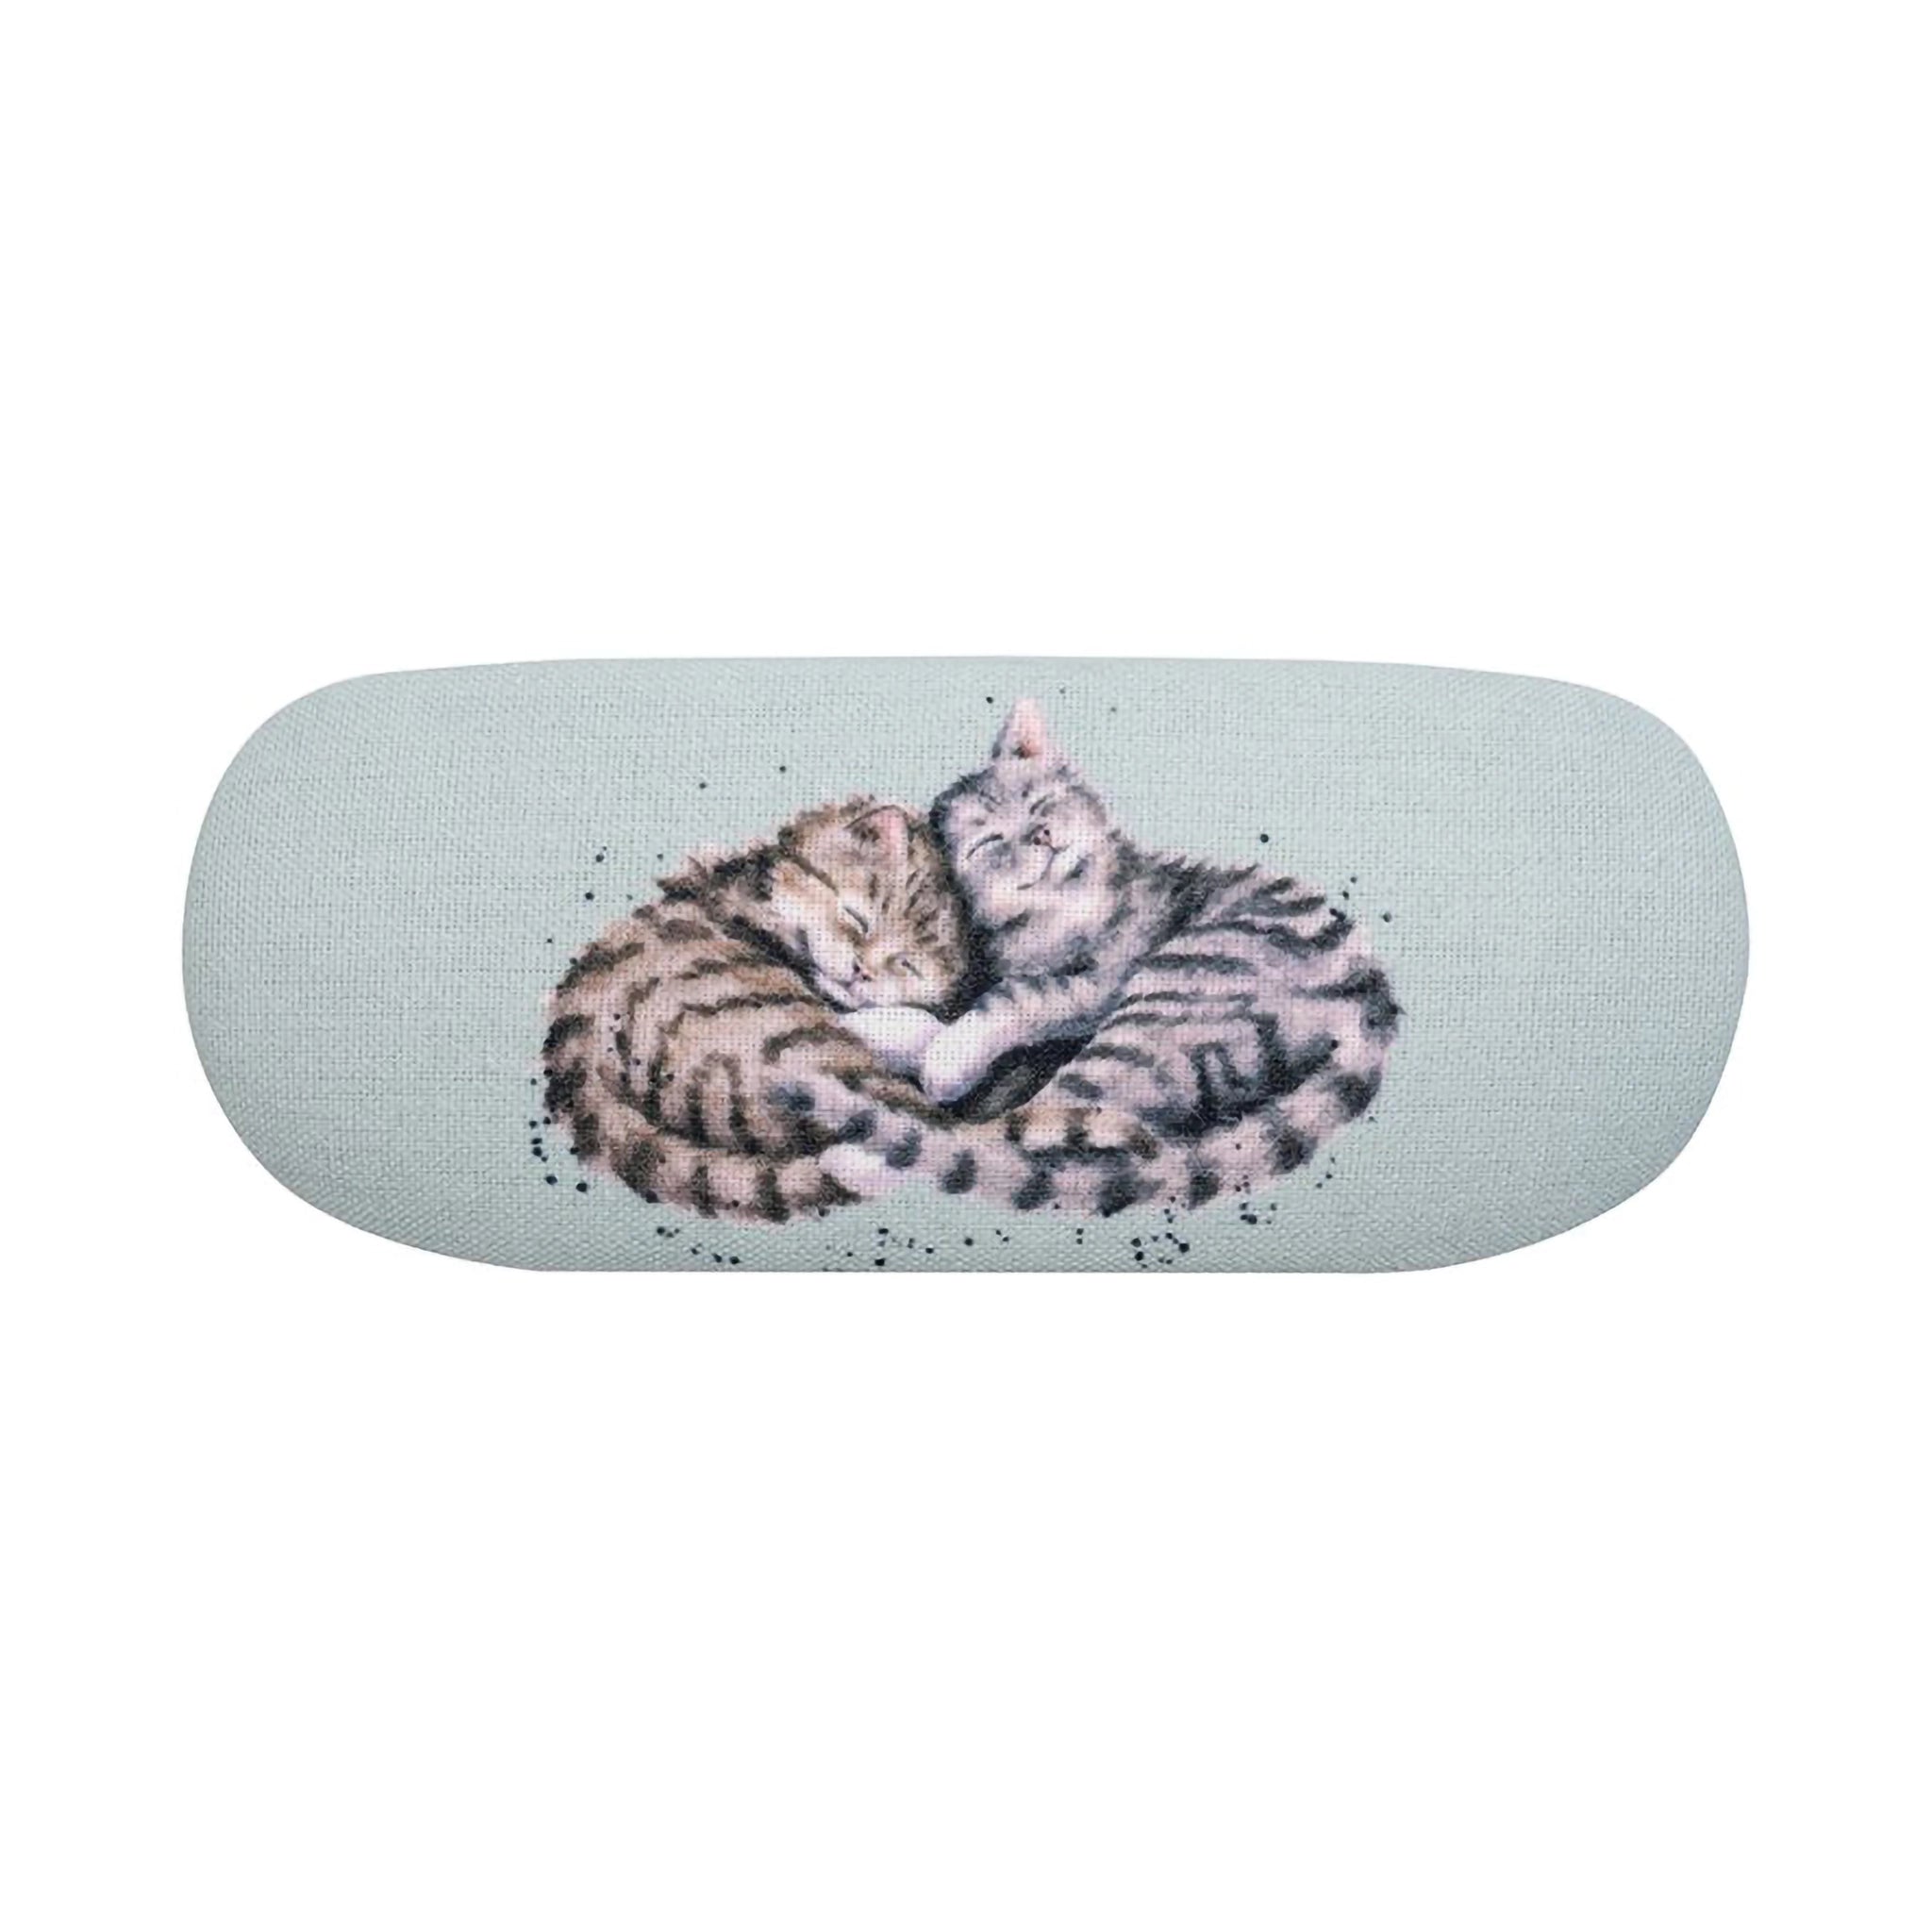 Light blue green glasses case with design of two sleeping and cuddling cats